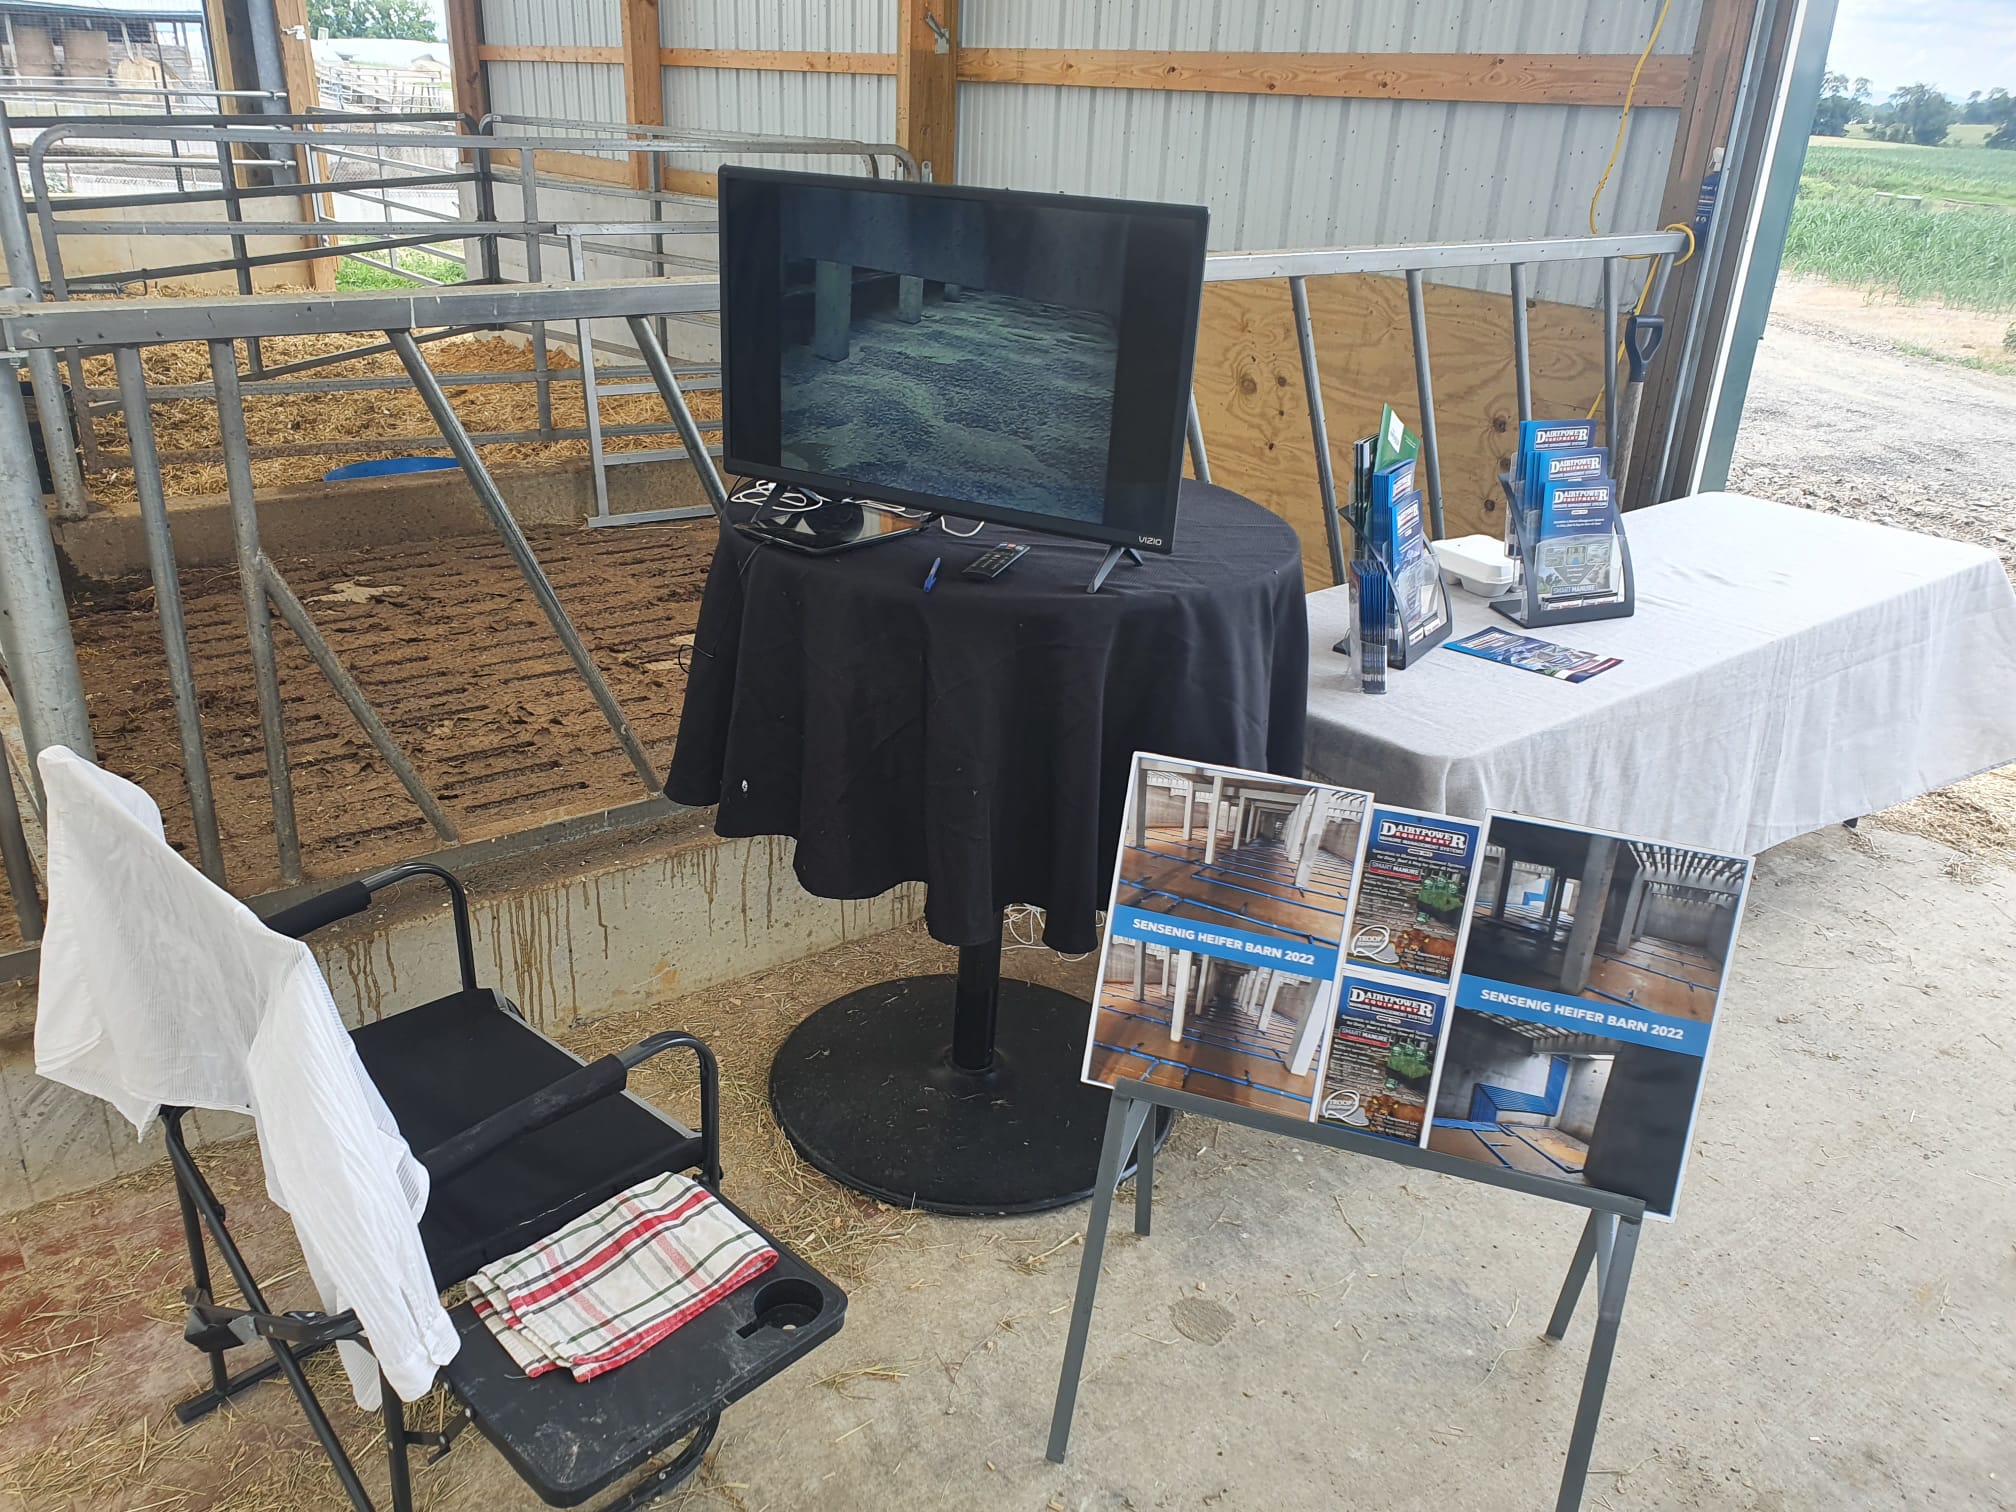 North American Manure Expo with Troop Equipment with product information on display